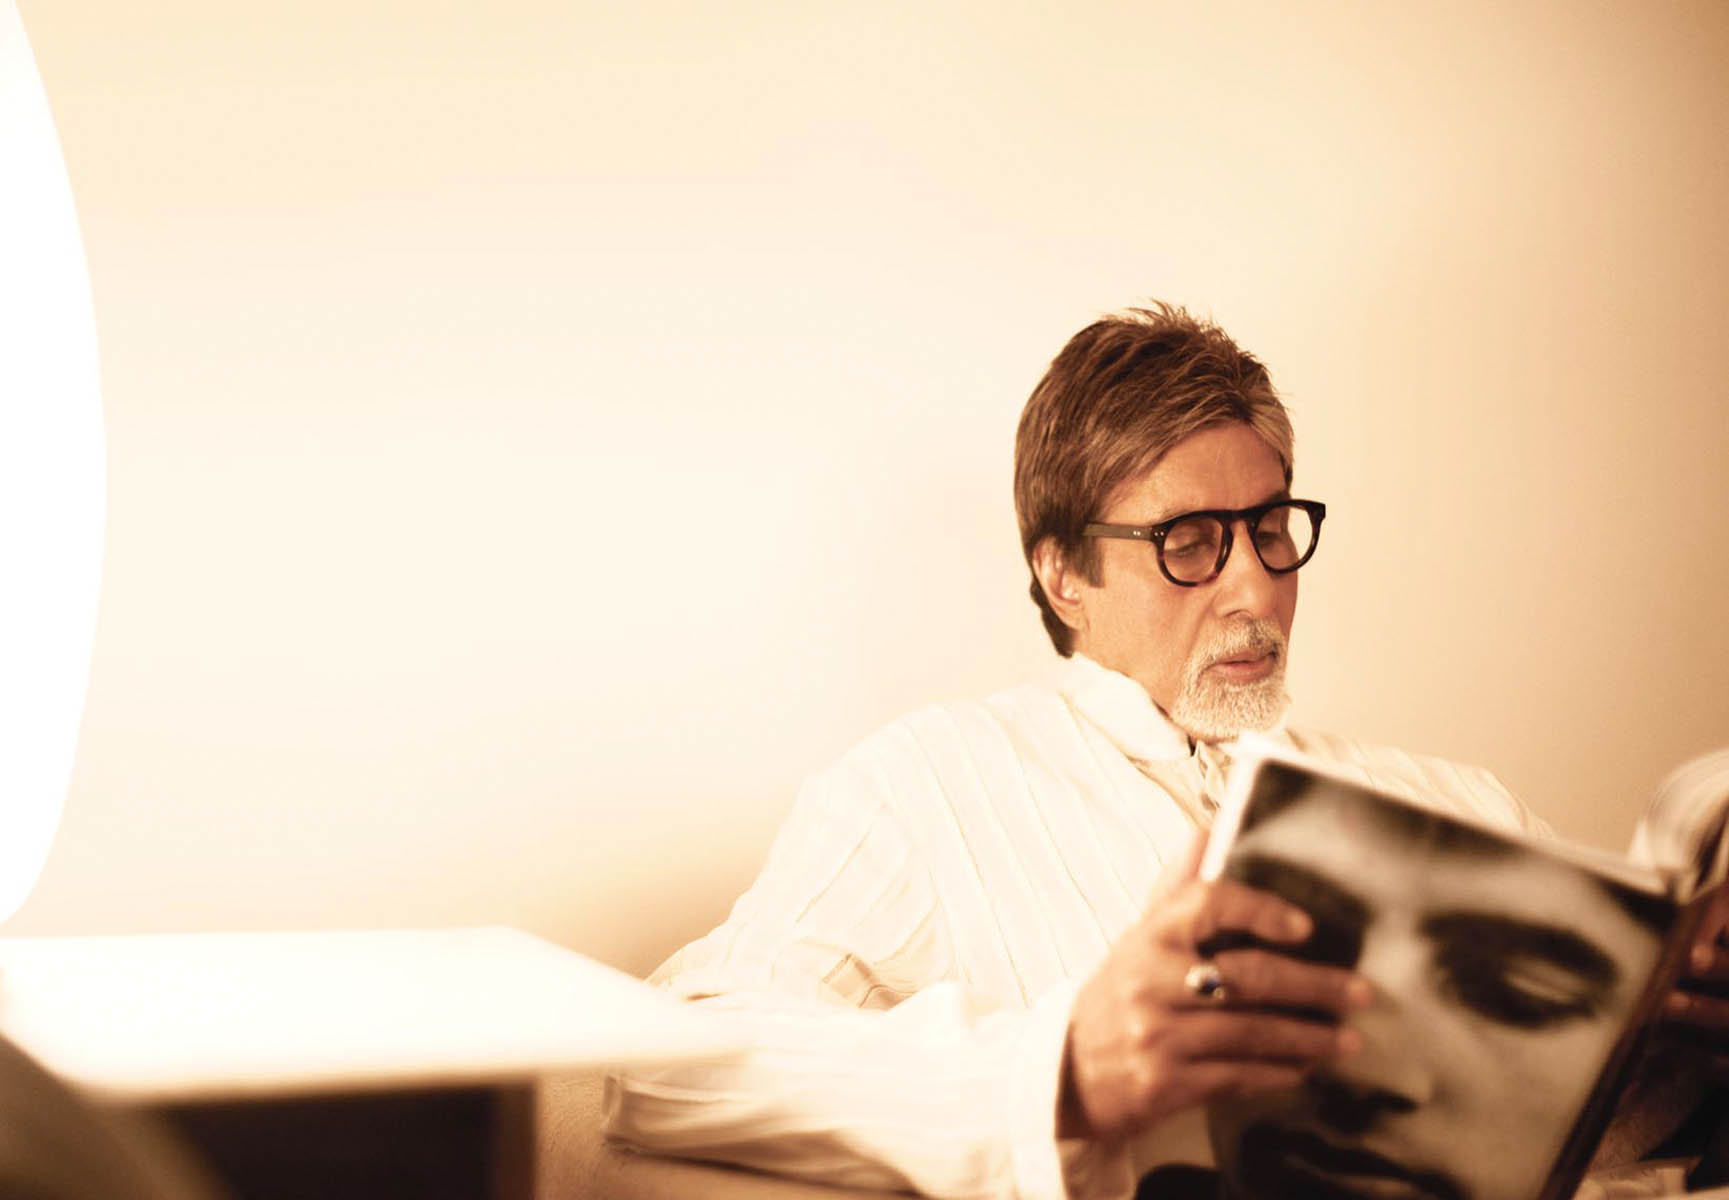 Best Bollywood Photographer in India Vikram Bawa, Actor Amitabh Bachchan for Hello Magazine, Shooting with Star, Advertising Photographer, Best Published Photographer, Best Editorial Photographer Vikram Bawa in Mumbai, India